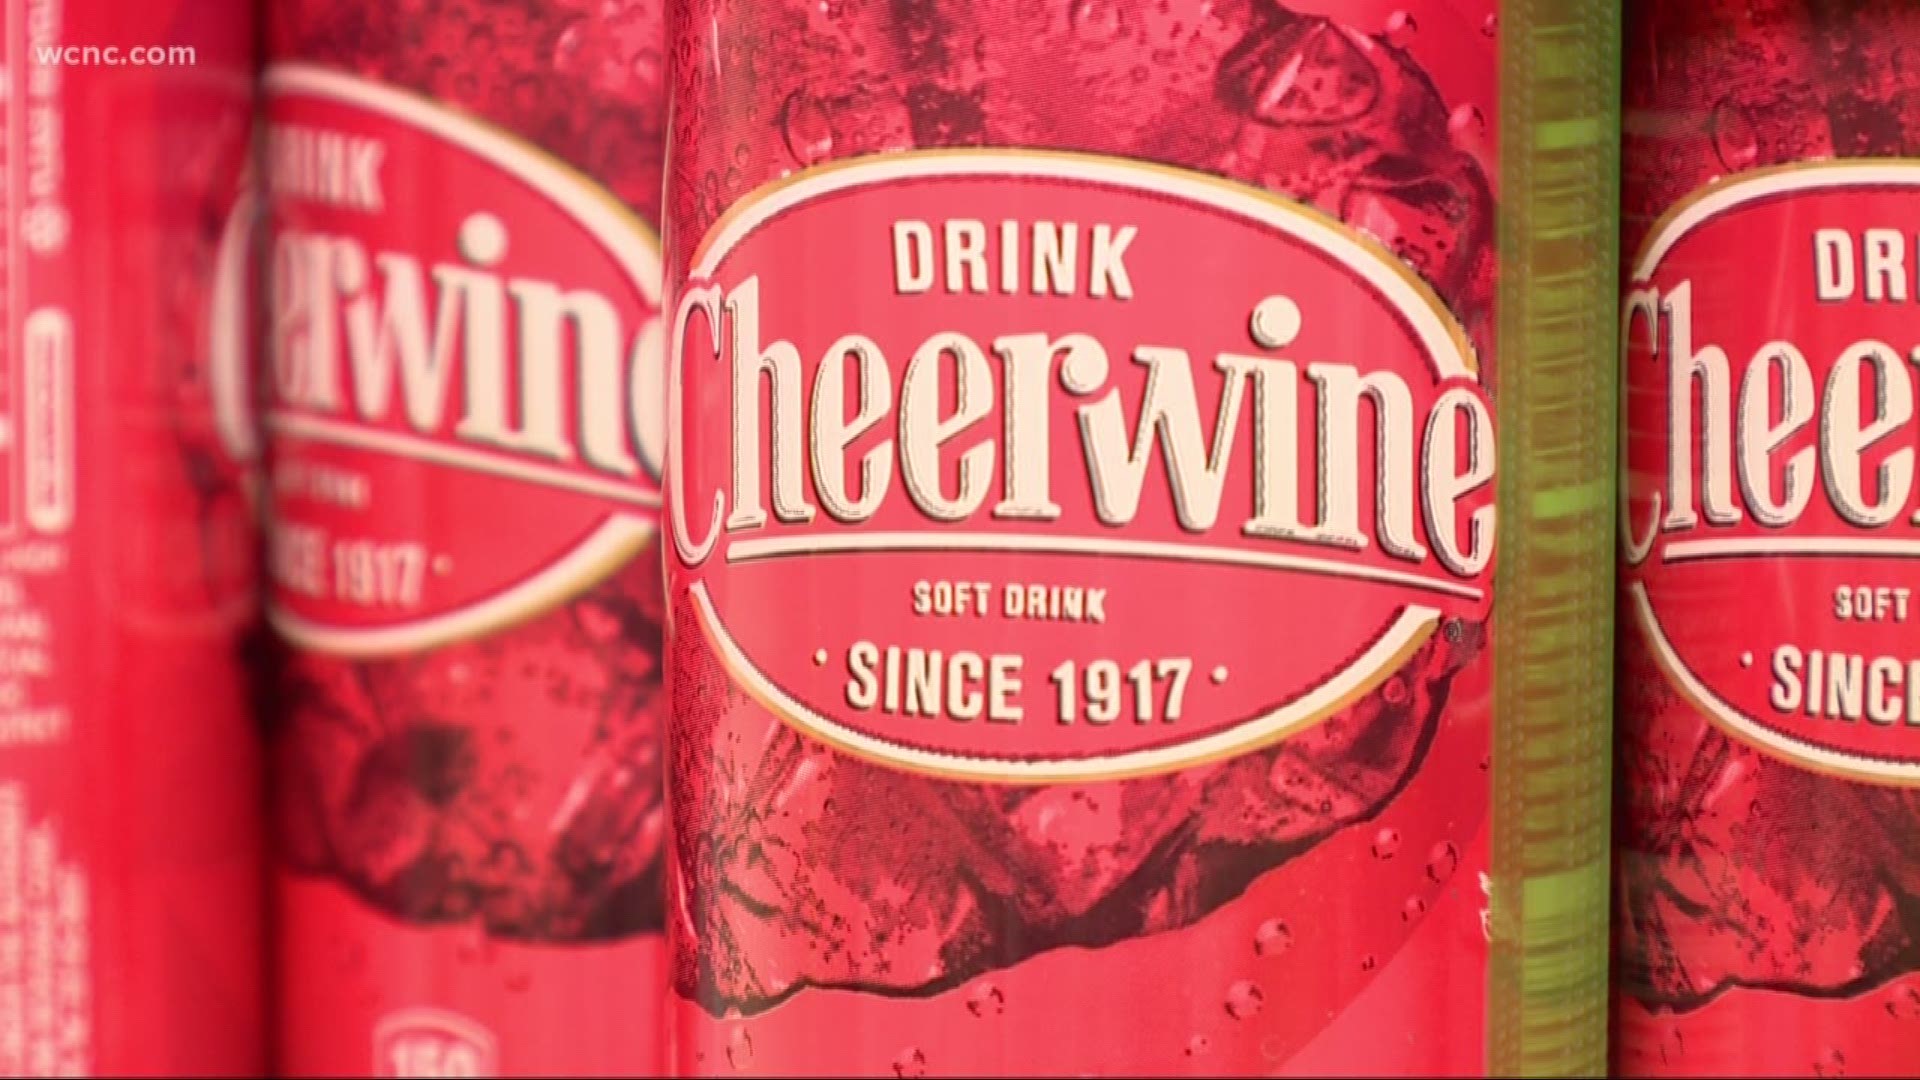 North Carolina favorite Cheerwine has been around for over 100 years and each day they crank out nearly 10,000 cases of the cherry-flavored drink.